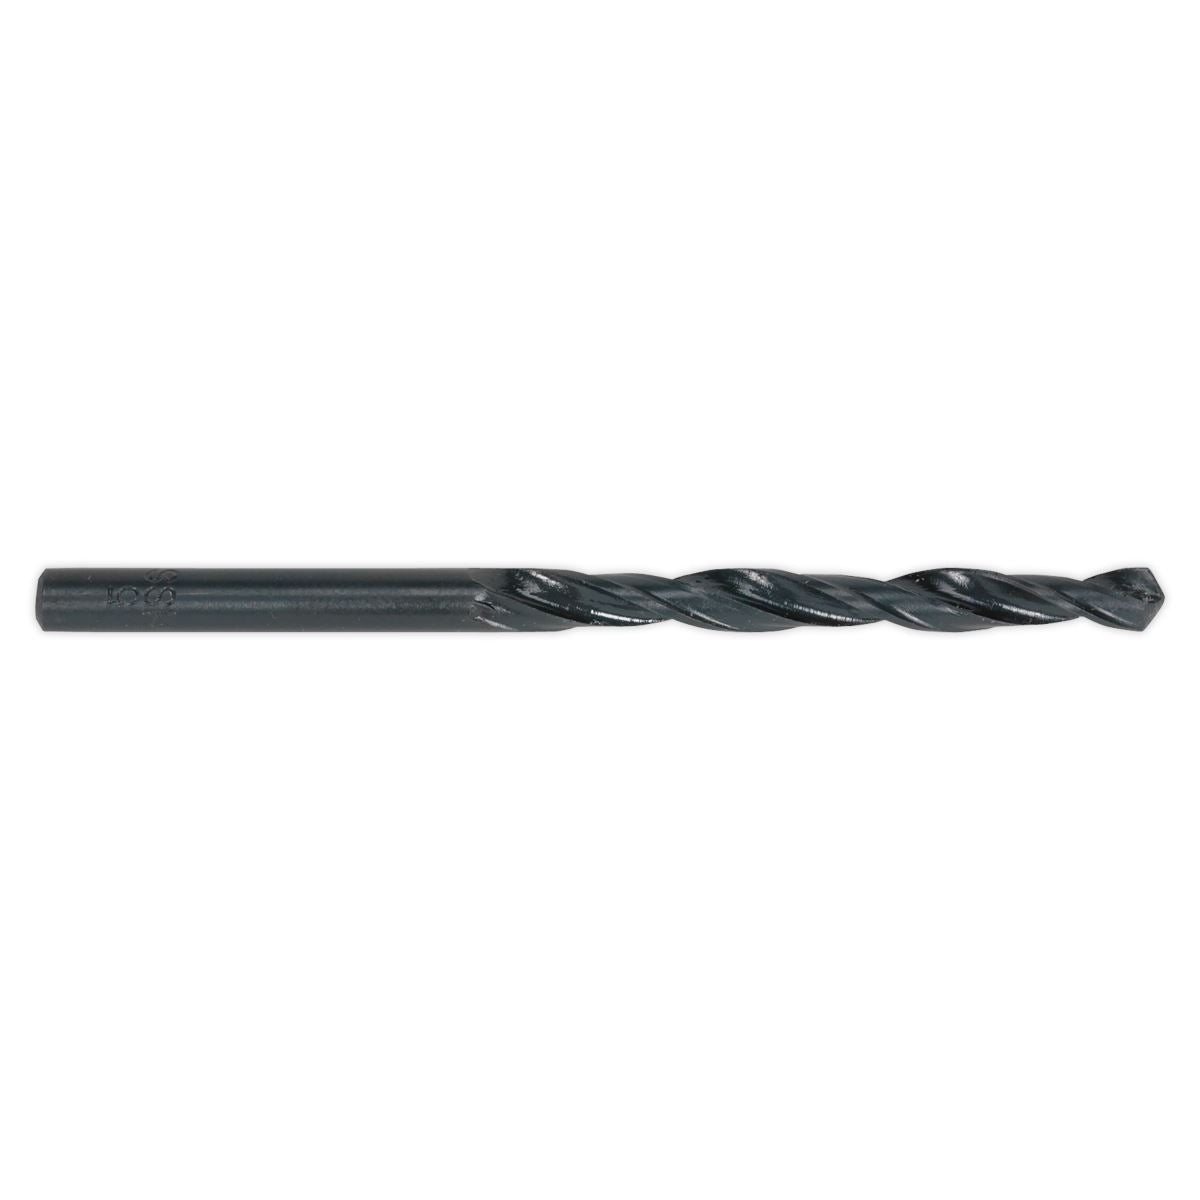 Sealey HSS Roll Forged Drill Bit Ø2.5mm Pack of 10